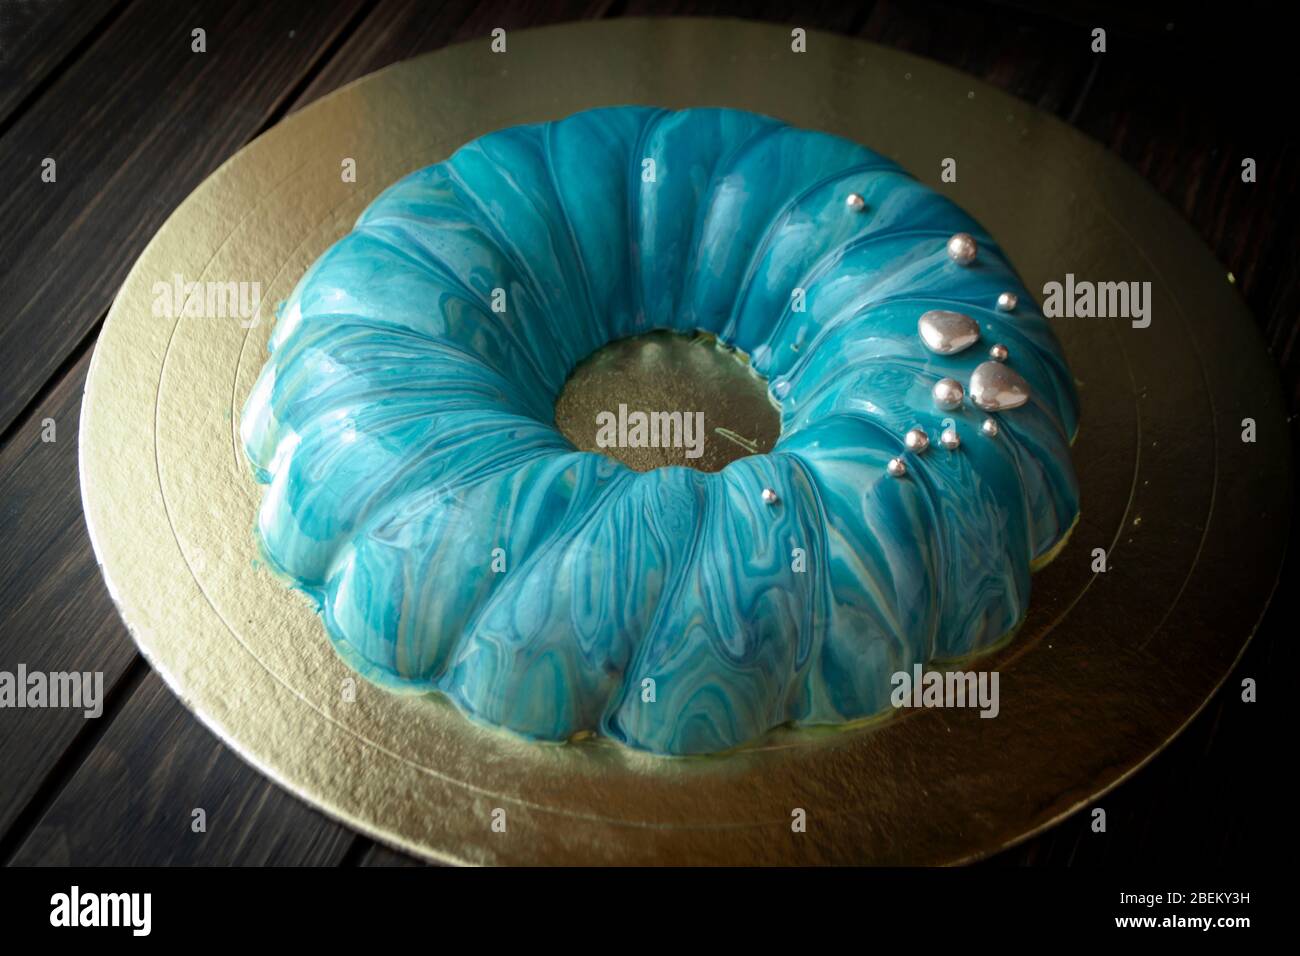 blue berry modern mousse cake, covered with a turquoise mirror glaze with sea effect. Stock Photo